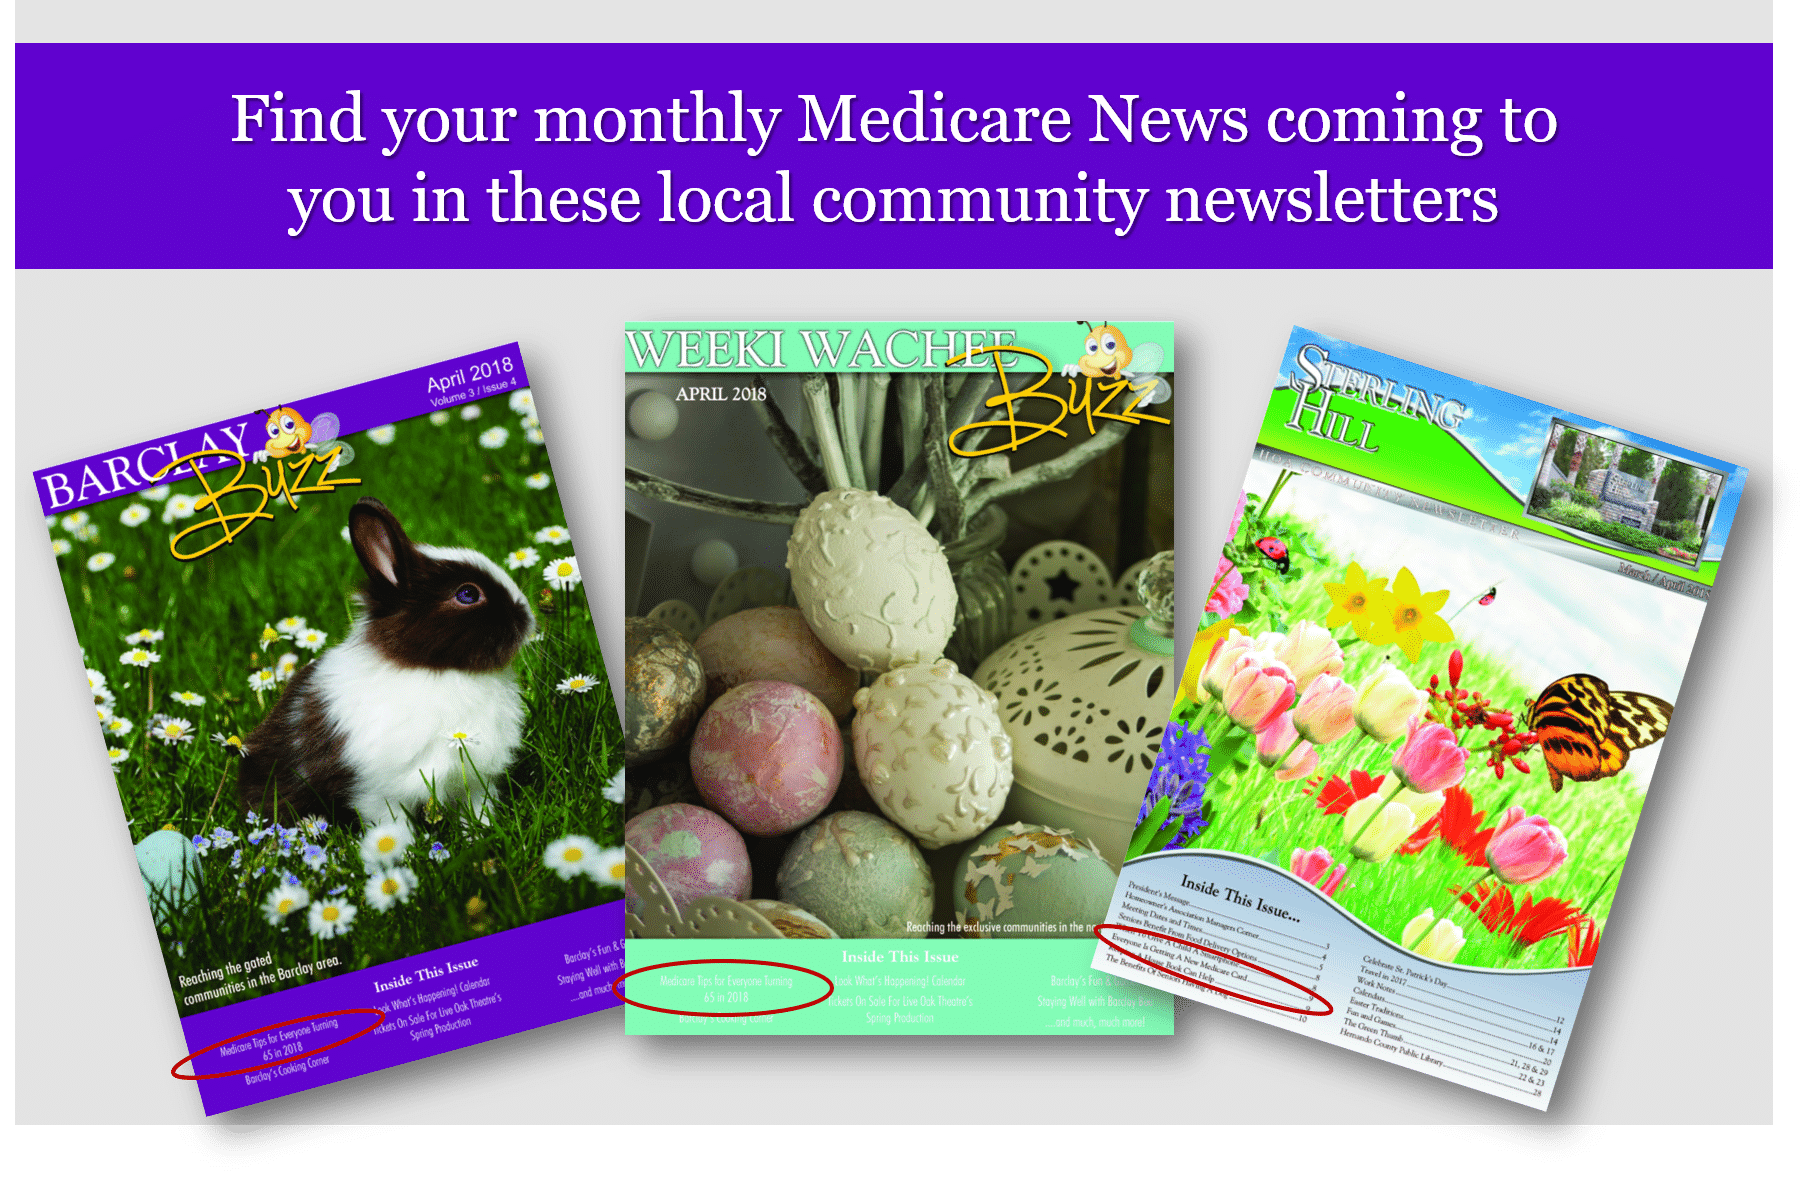 Your Monthly Medicare News & Community Events Coming To You In These Local Newsletters